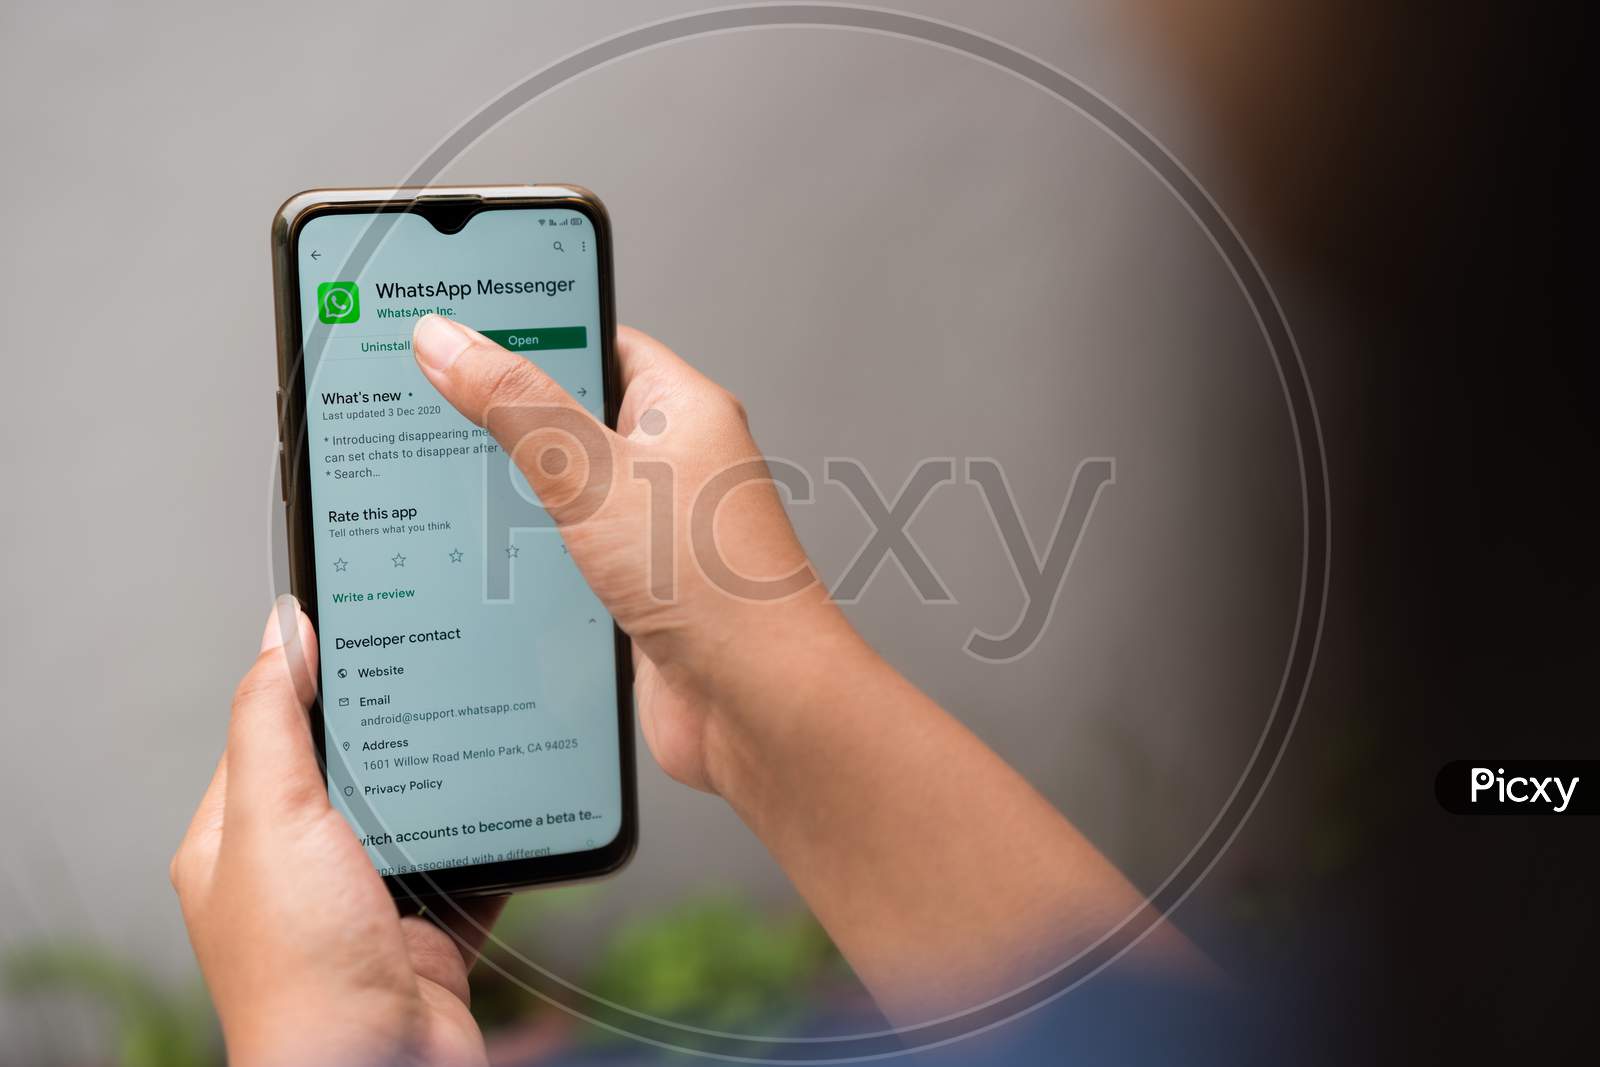 Over the shoulder photo of a person uninstalling Whatsapp on a smartphone. Quitting social media apps for self improvement, time management, privacy